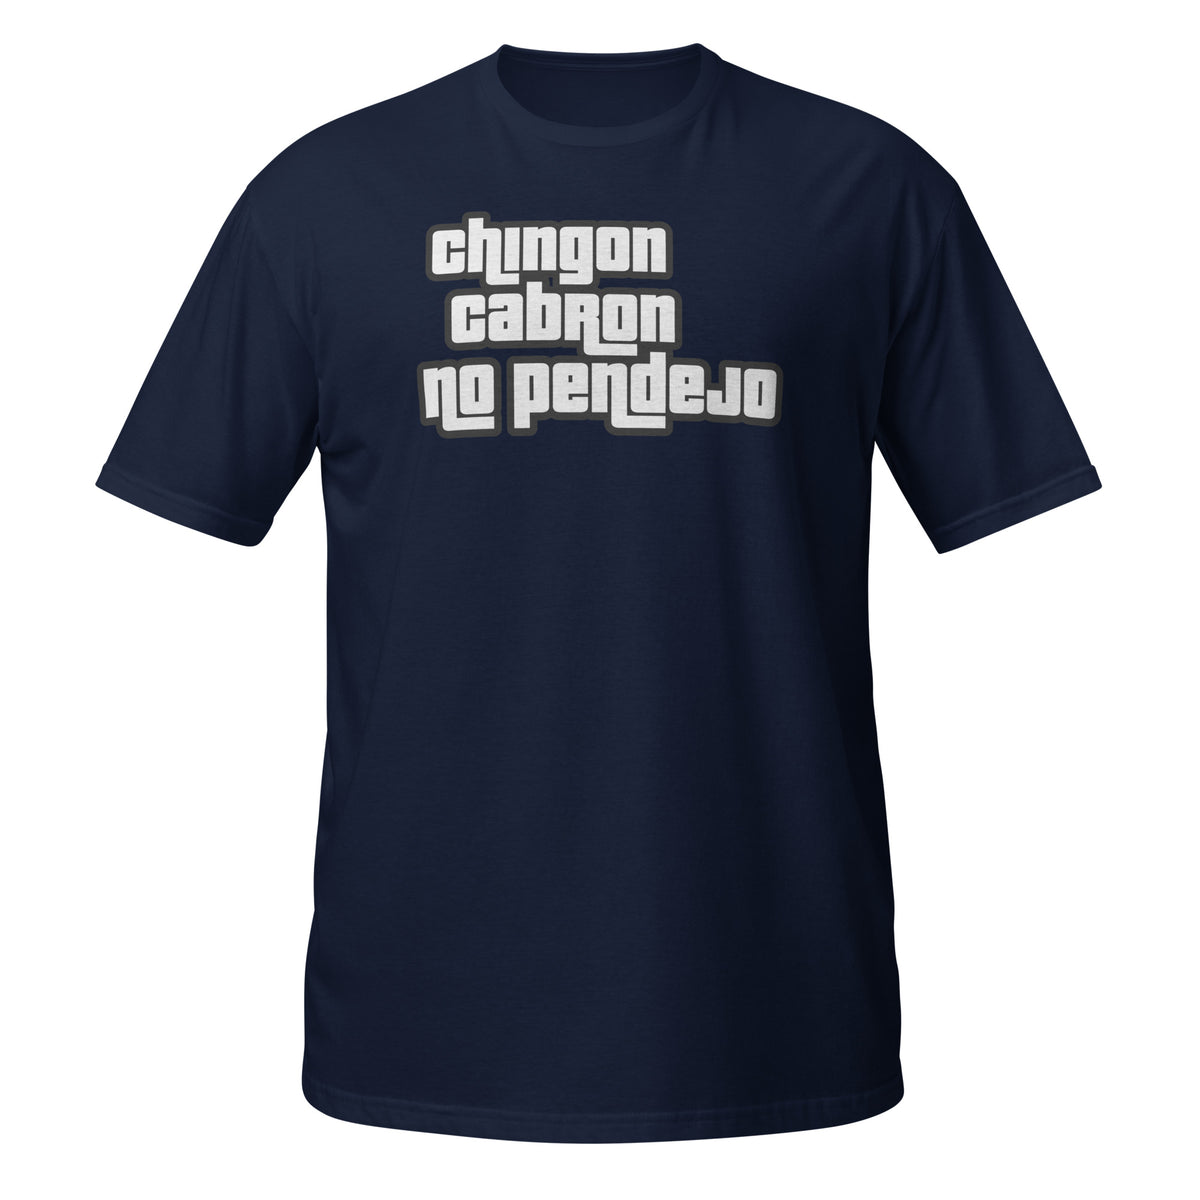 Chingon, Cabron, No Pendejo T-Shirt (Bad Ass but not an asshole)